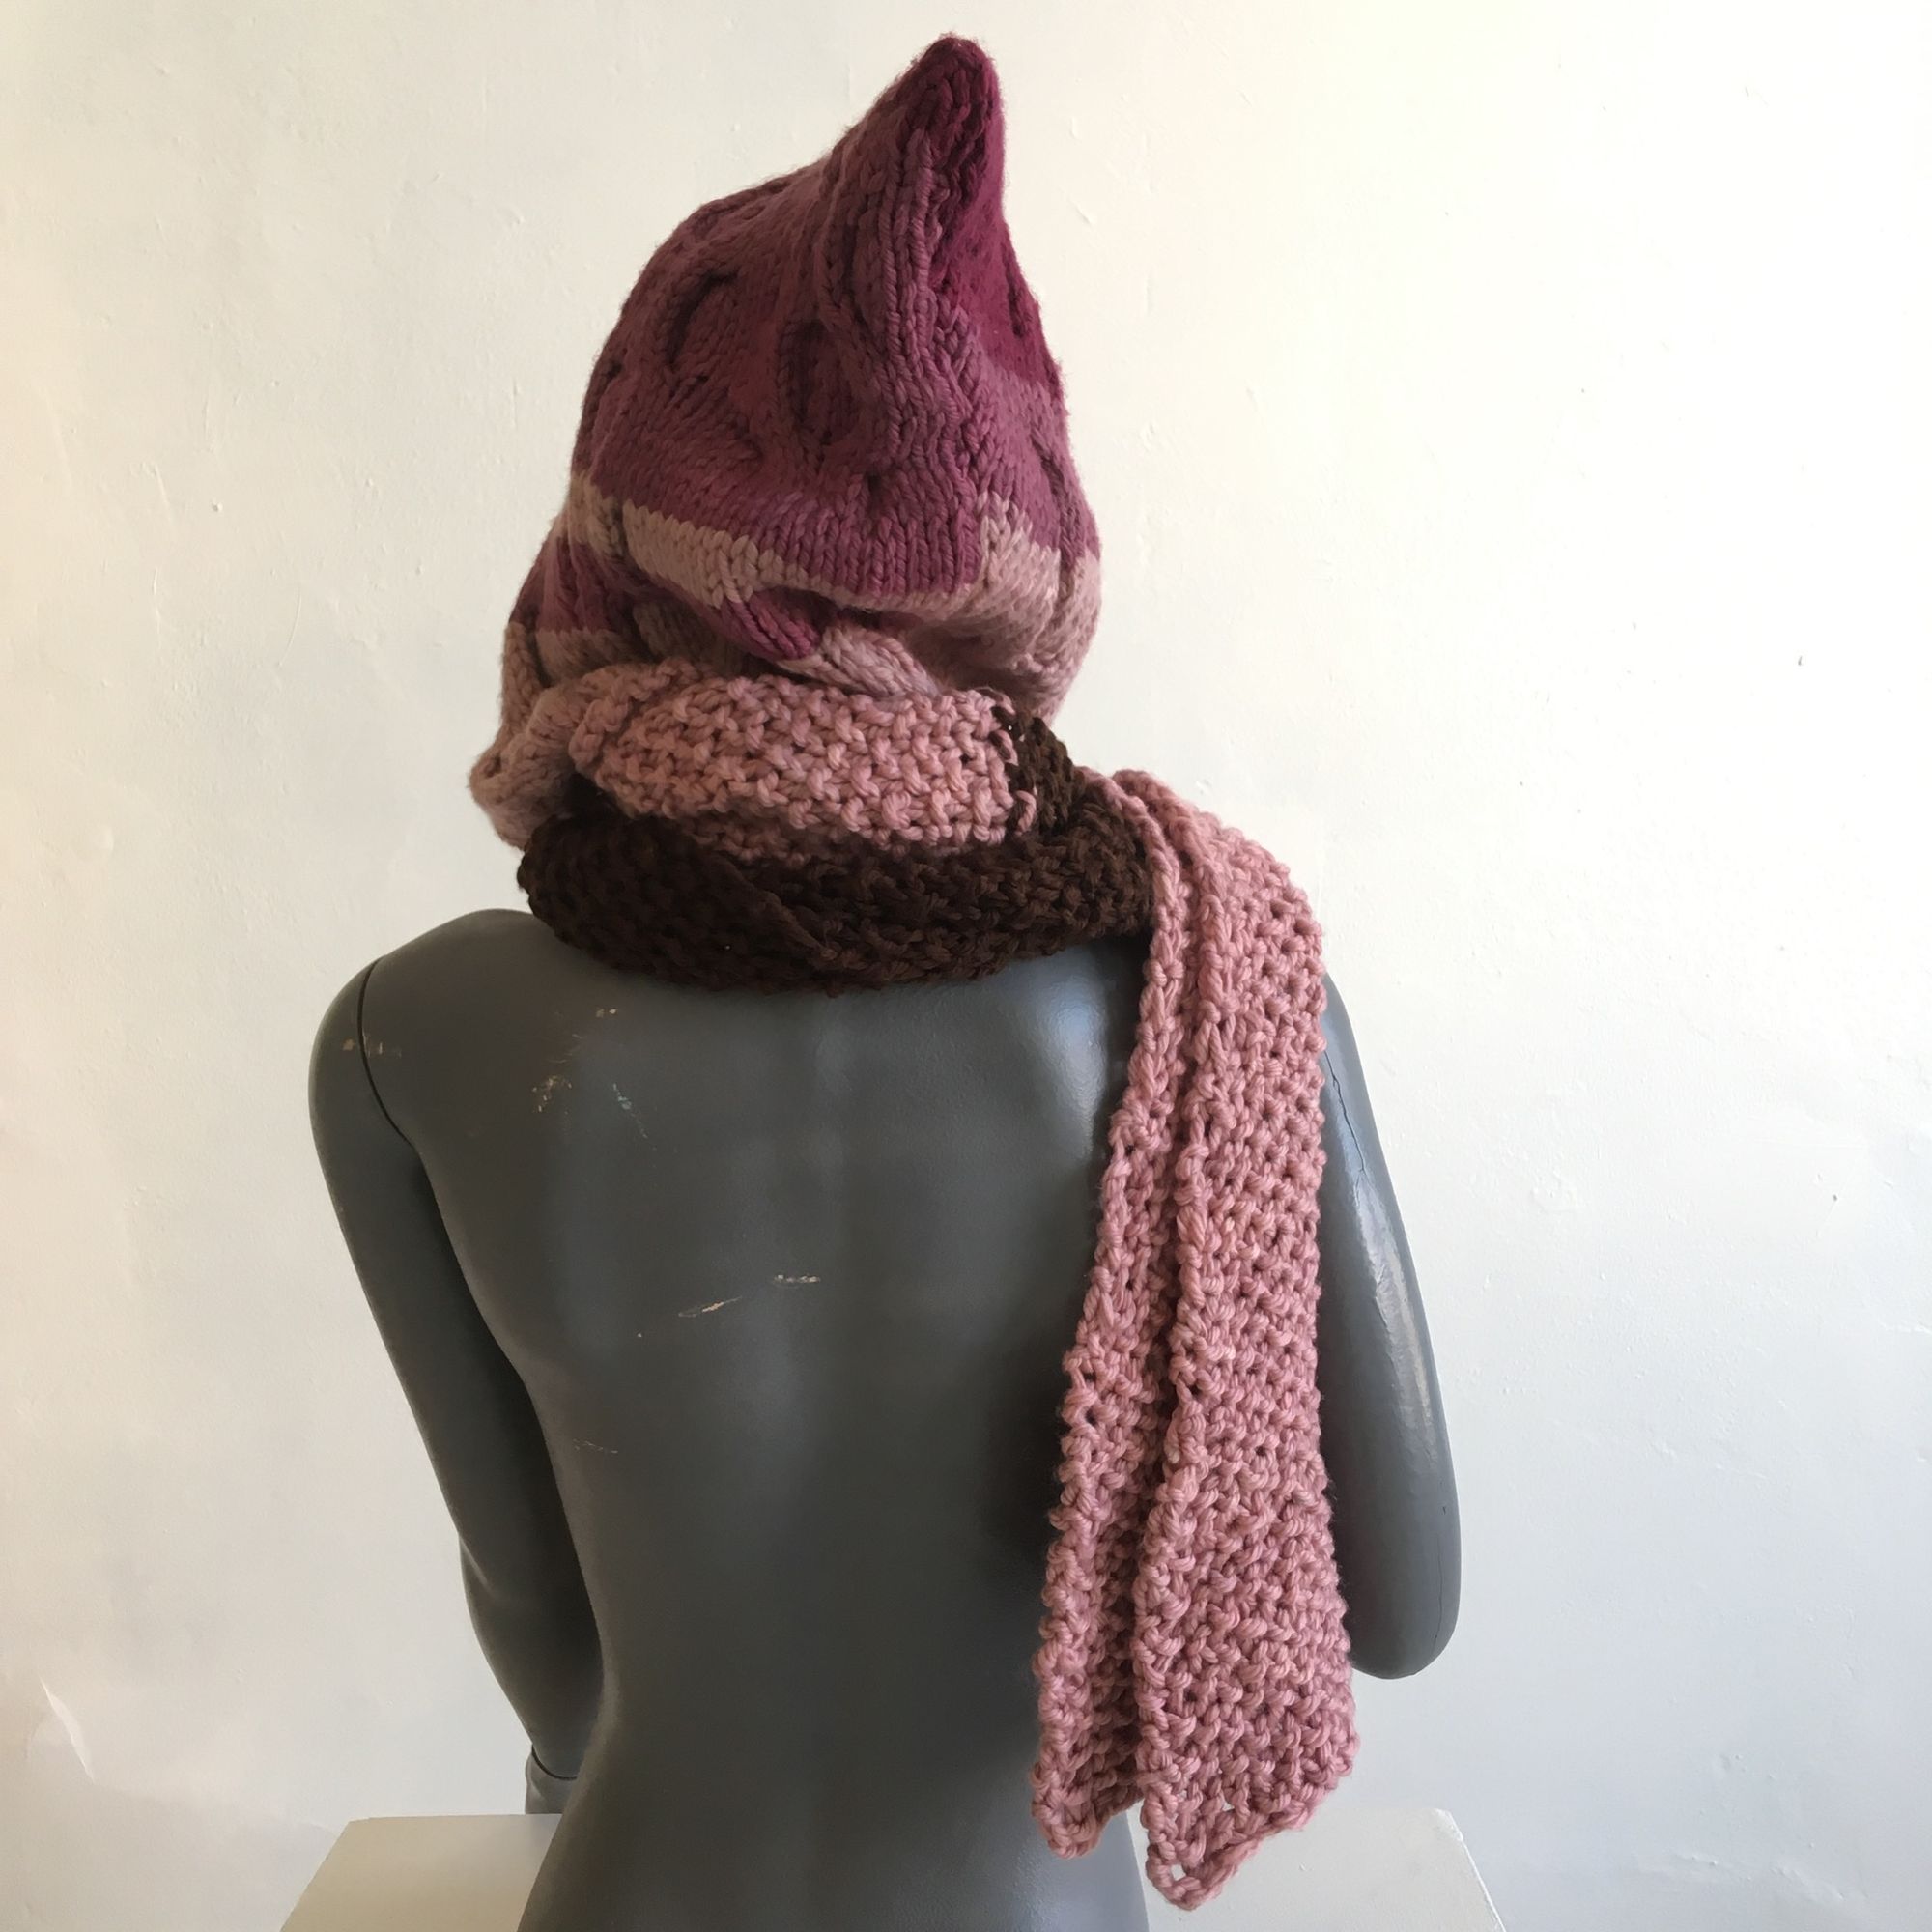 pink and brown cable knit hood-scarf on a grey mannequin against a white wall